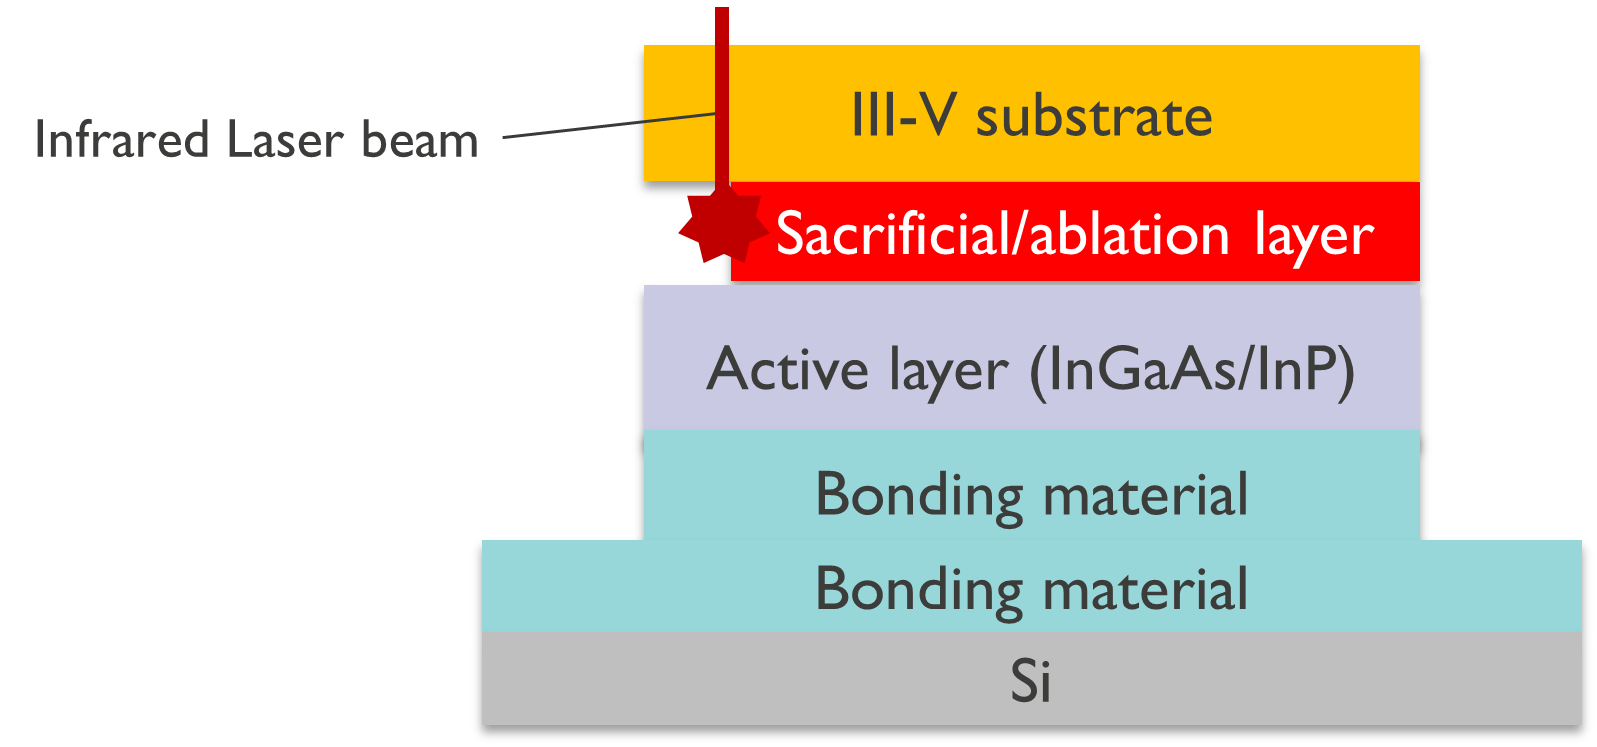 Unlocking layers detachment of III-V materials from epi substrate by infrared laser techniques